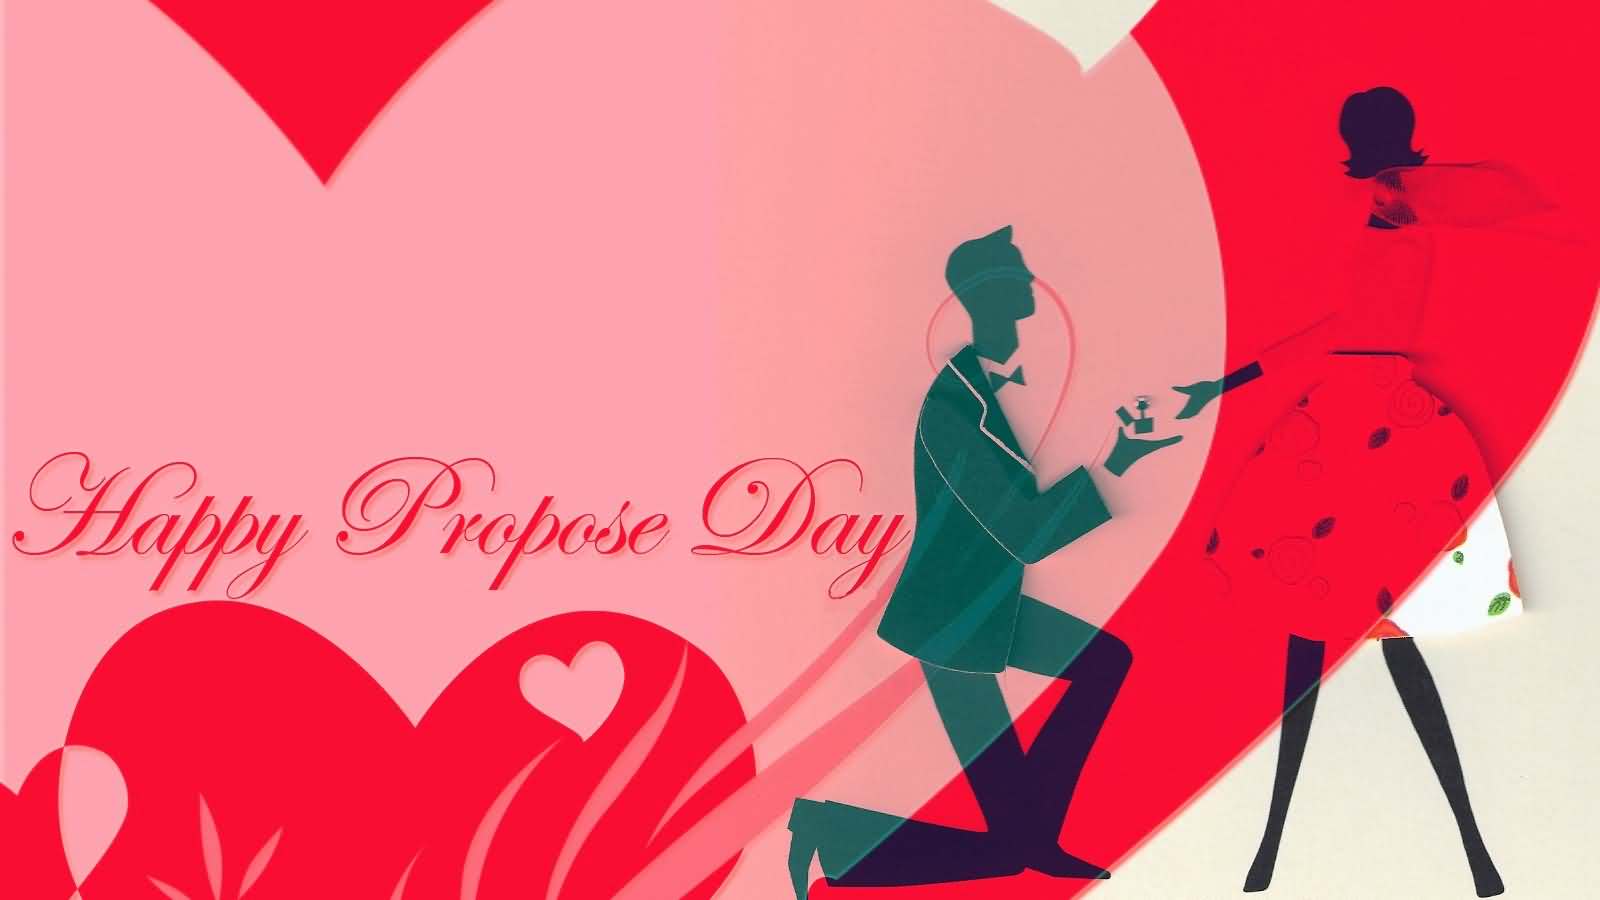 happy propose day wishes wallpaper